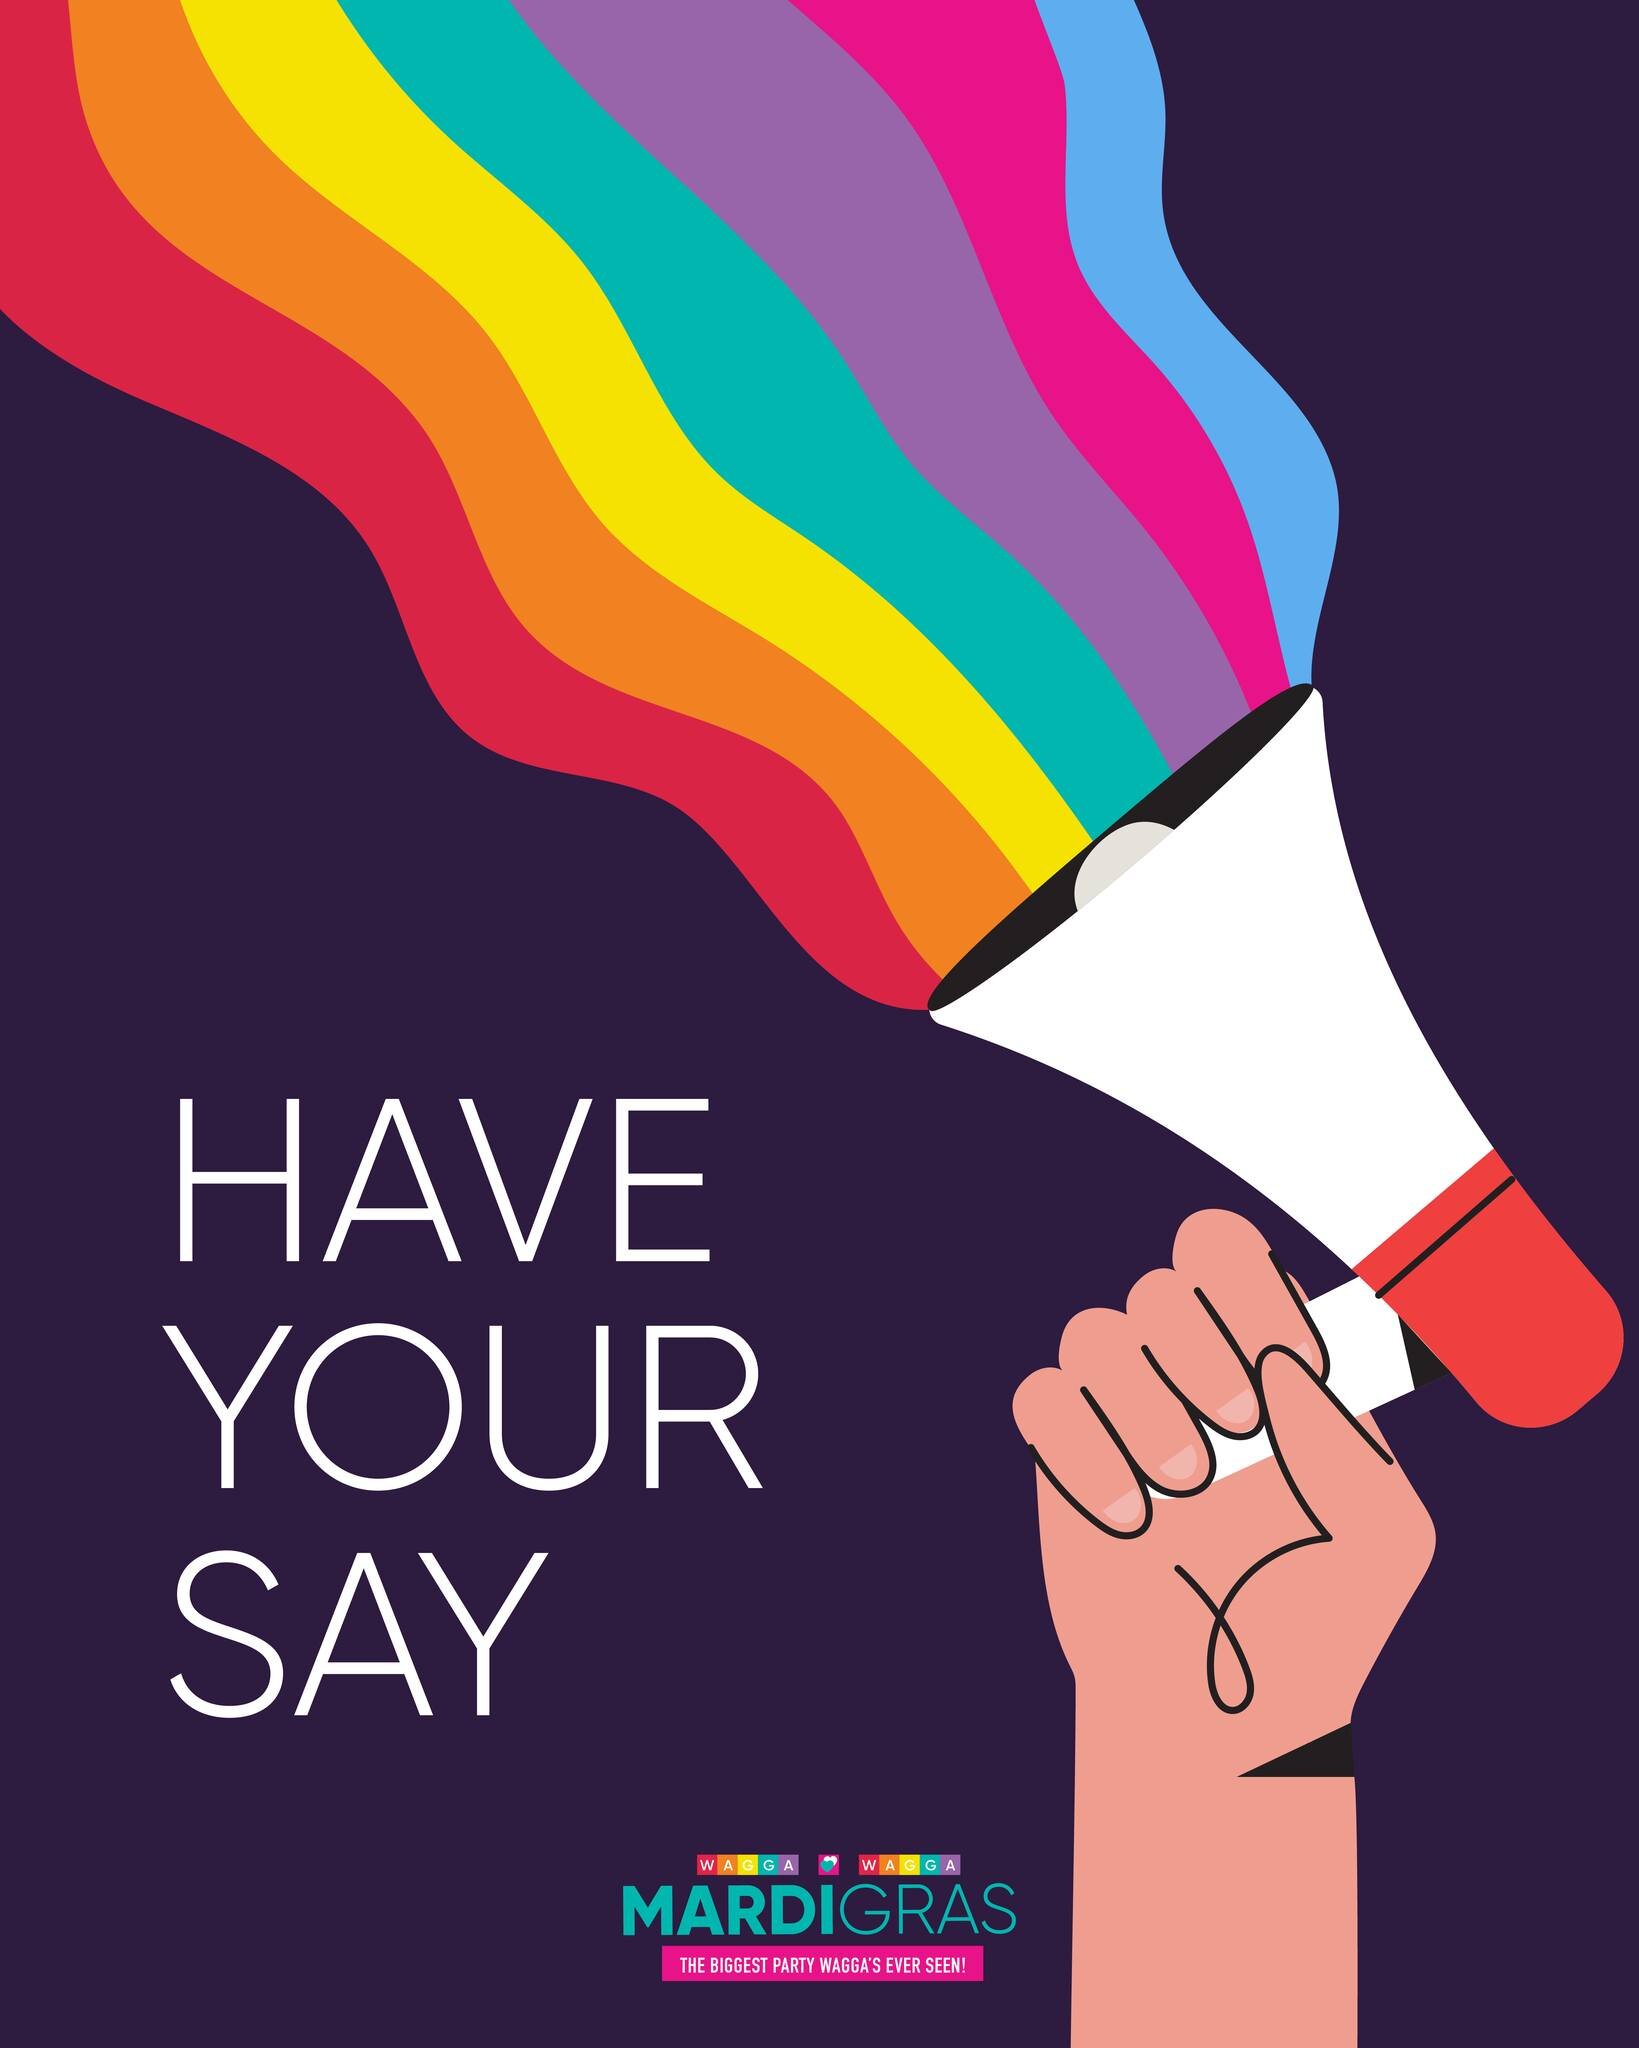 HAVE YOUR SAY! 📢🌈👋

We are keen to hear about your experience at the Wagga Wagga Mardi Gras so that we can make the 2025 event bigger and better!

Please take our short survey here: https://docs.google.com/forms/d/e/1FAIpQLSfwHqT45wha6ZYMDFGeeepgf